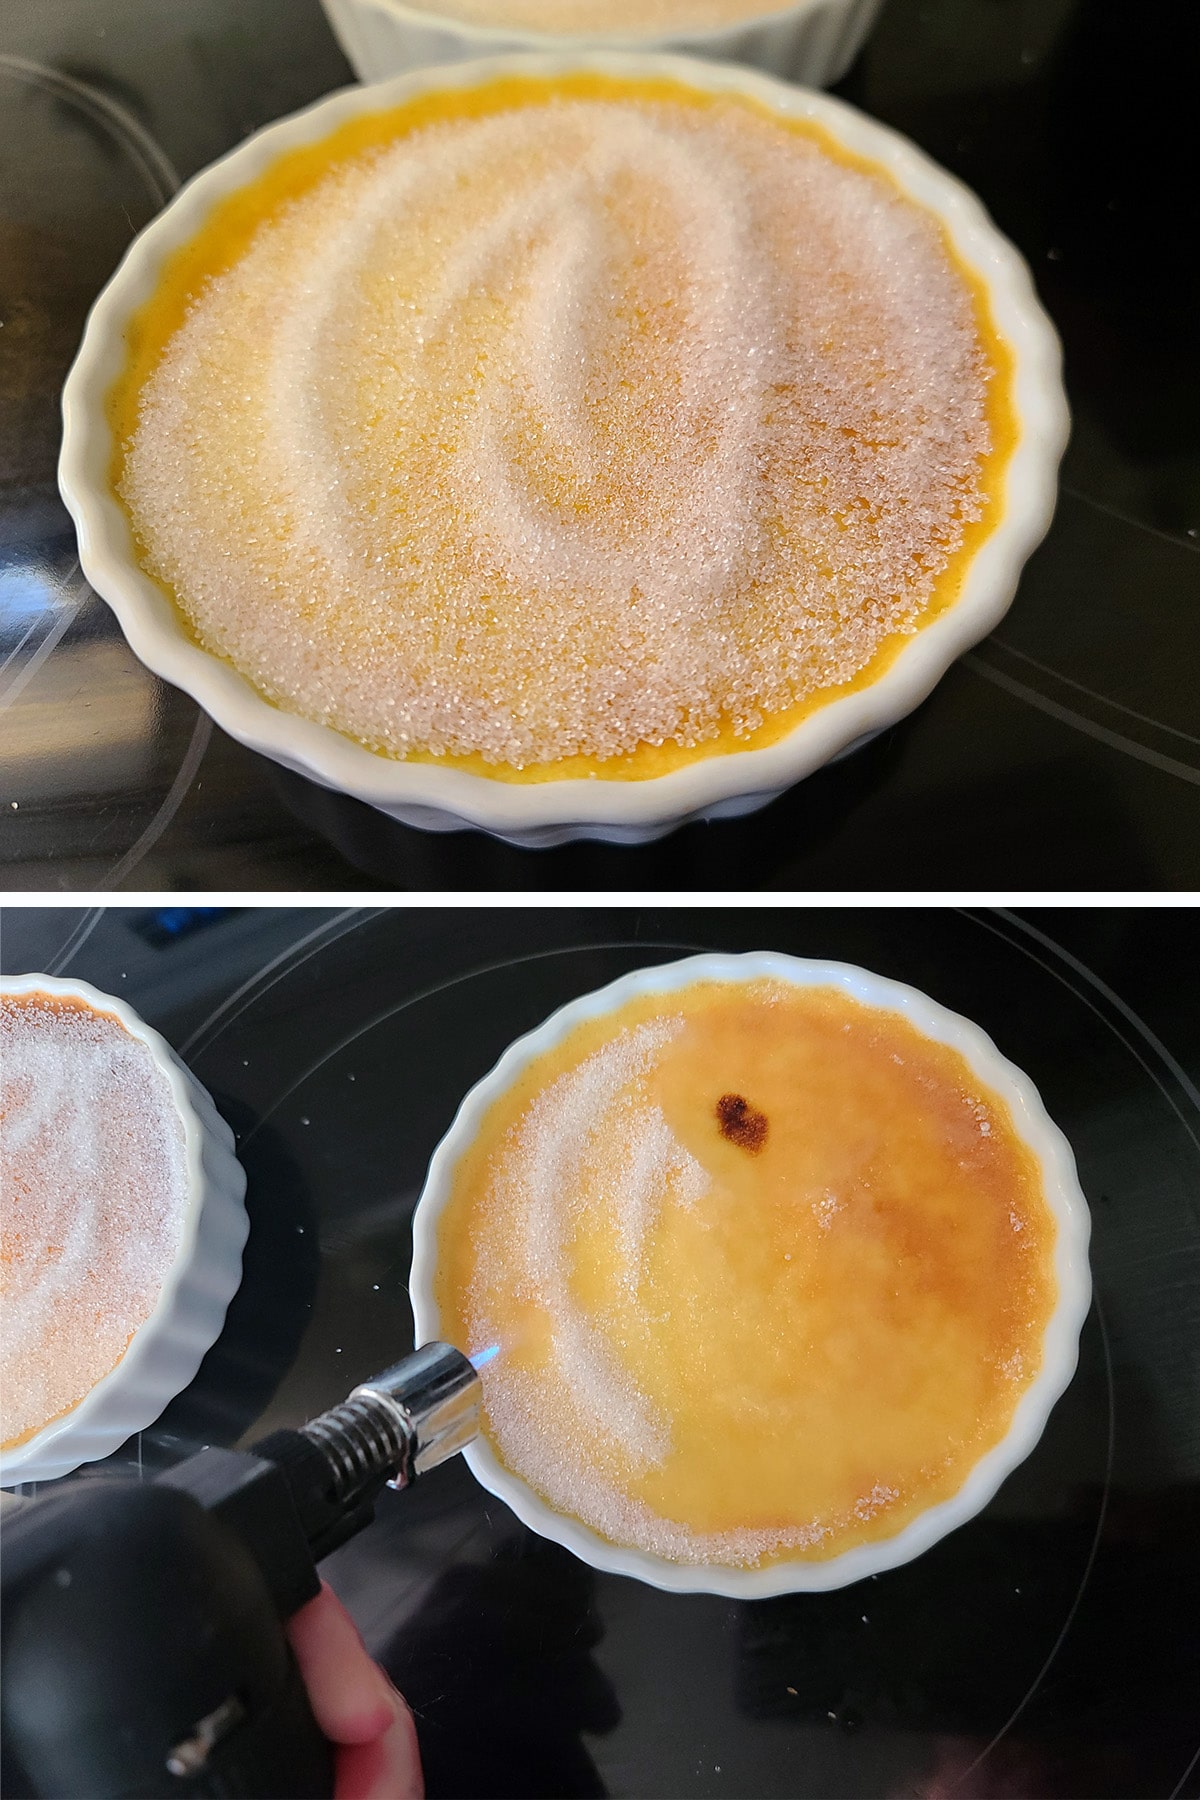 A 2 part image showing sugar being spread on a creme brulee, and a kitchen torch being used to caramelize it.